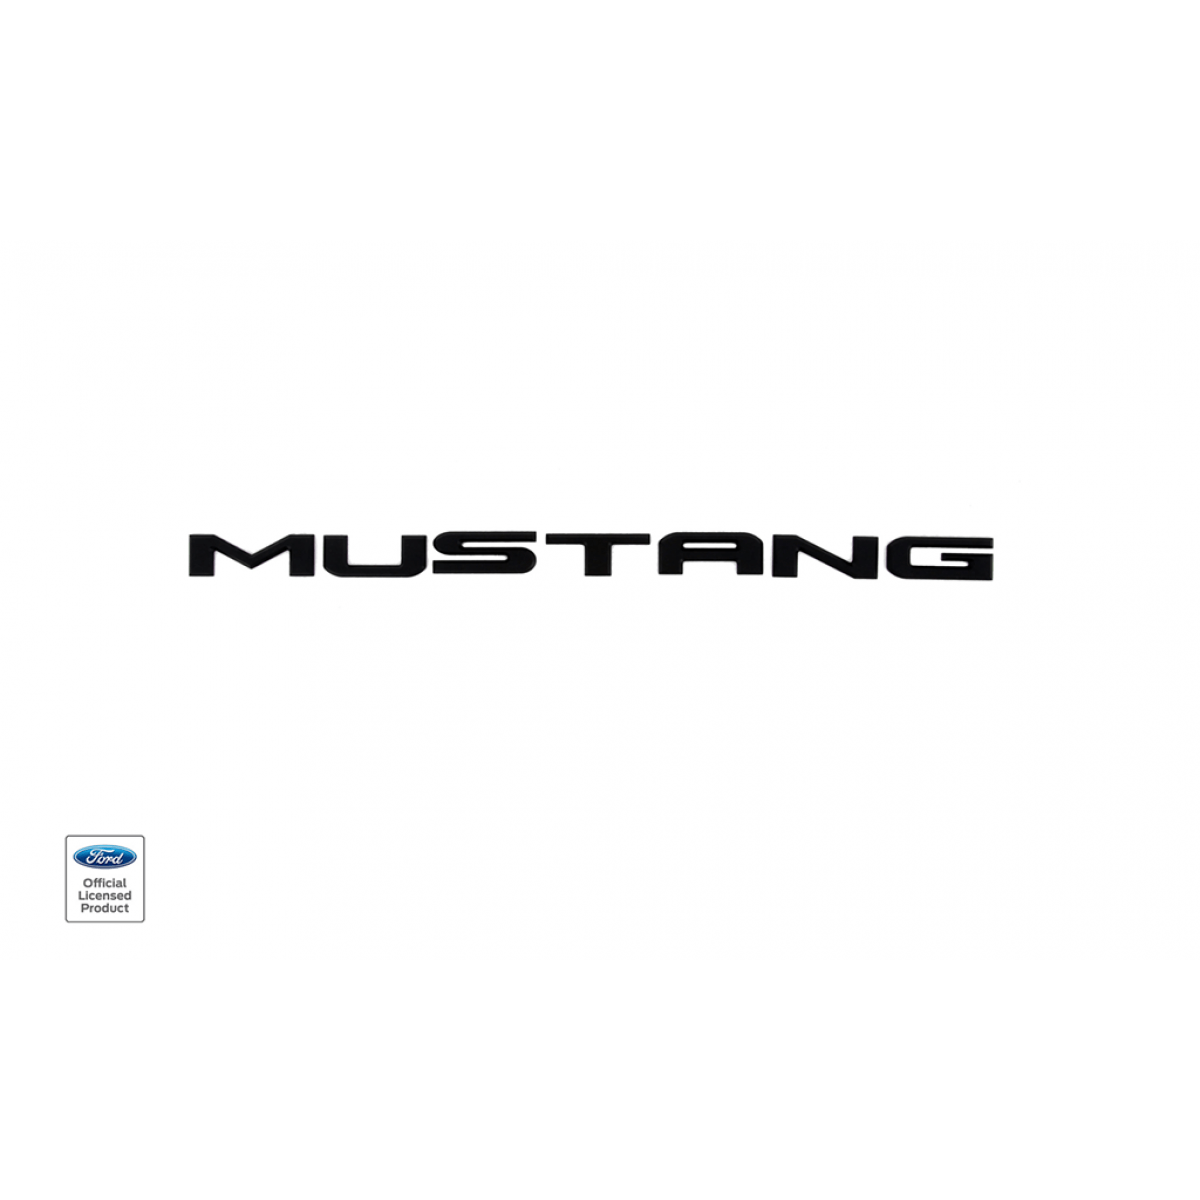 Black and White Ford Mustang Logo - 2010-2013 Ford Mustang Letters Emblem, Black - DefenderWorx